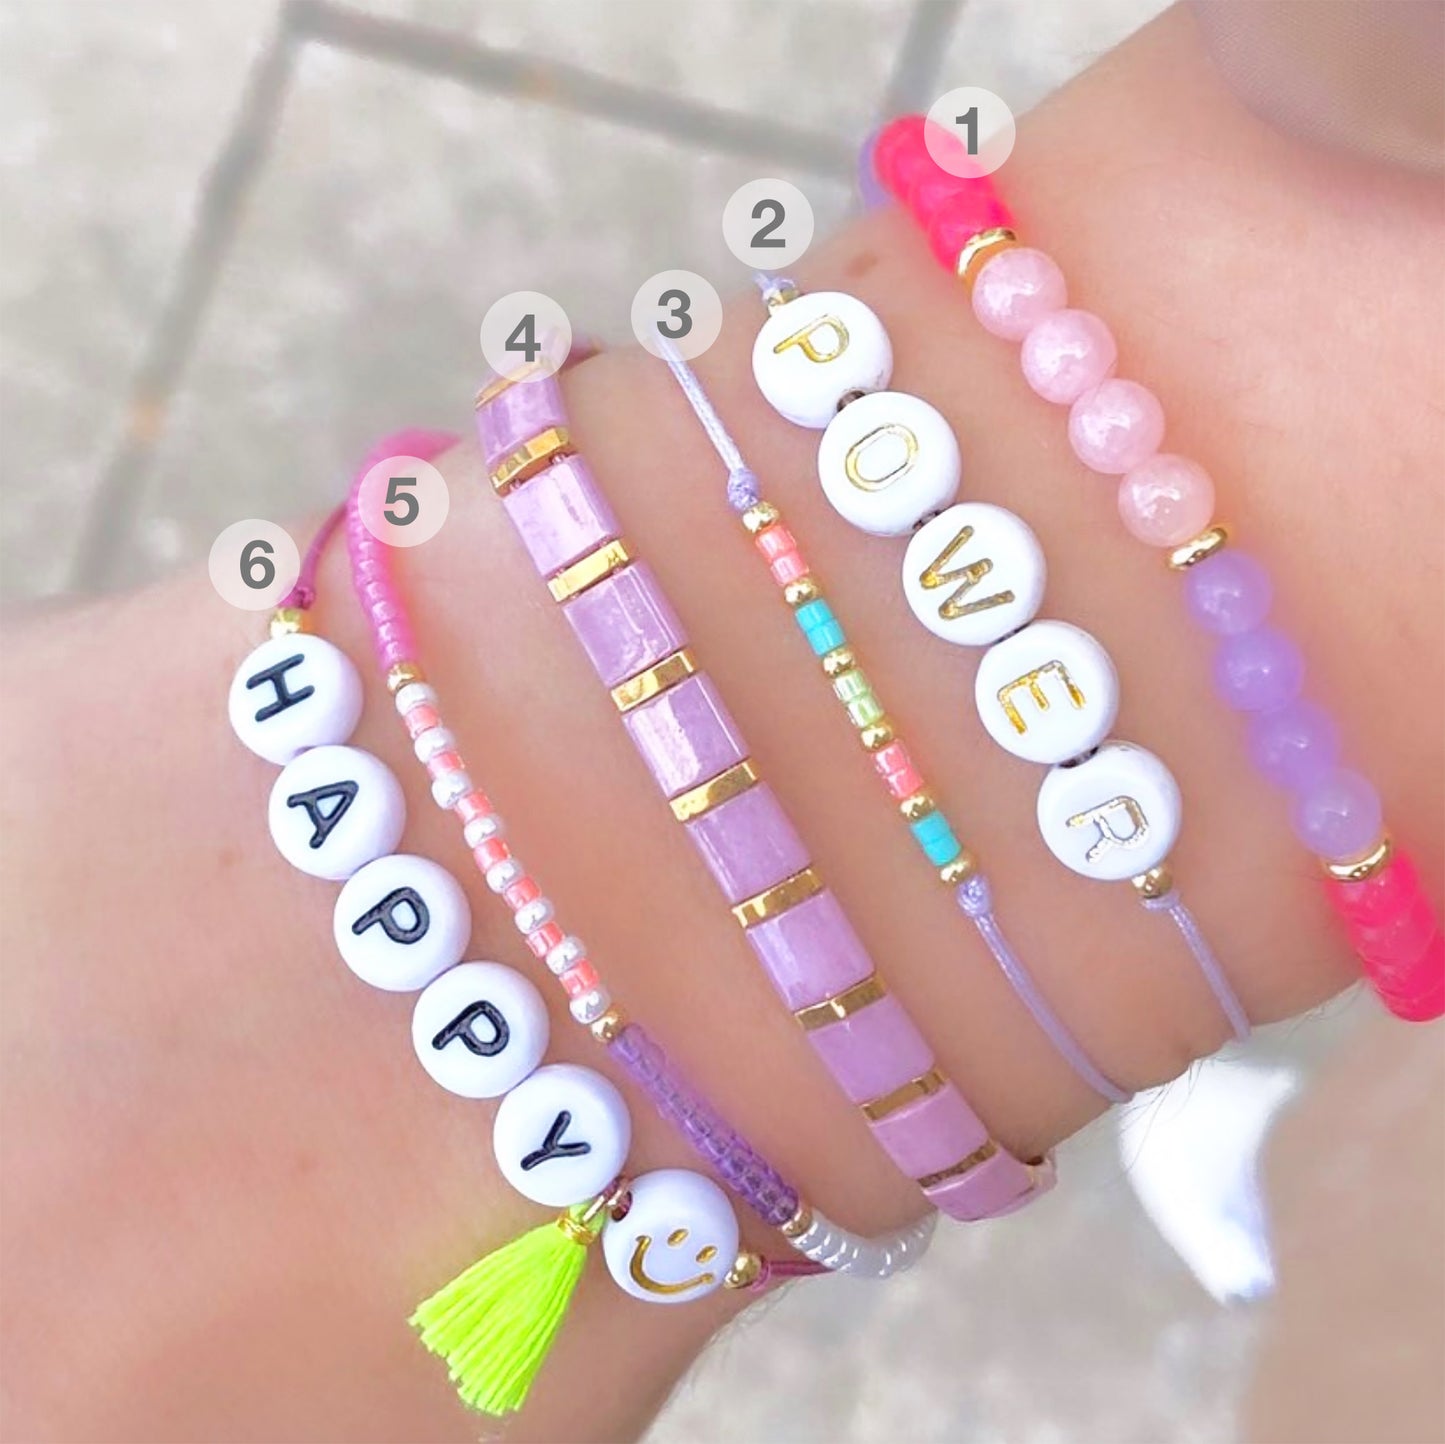 Shop the Look // Instagram Arm Party // Pink Power